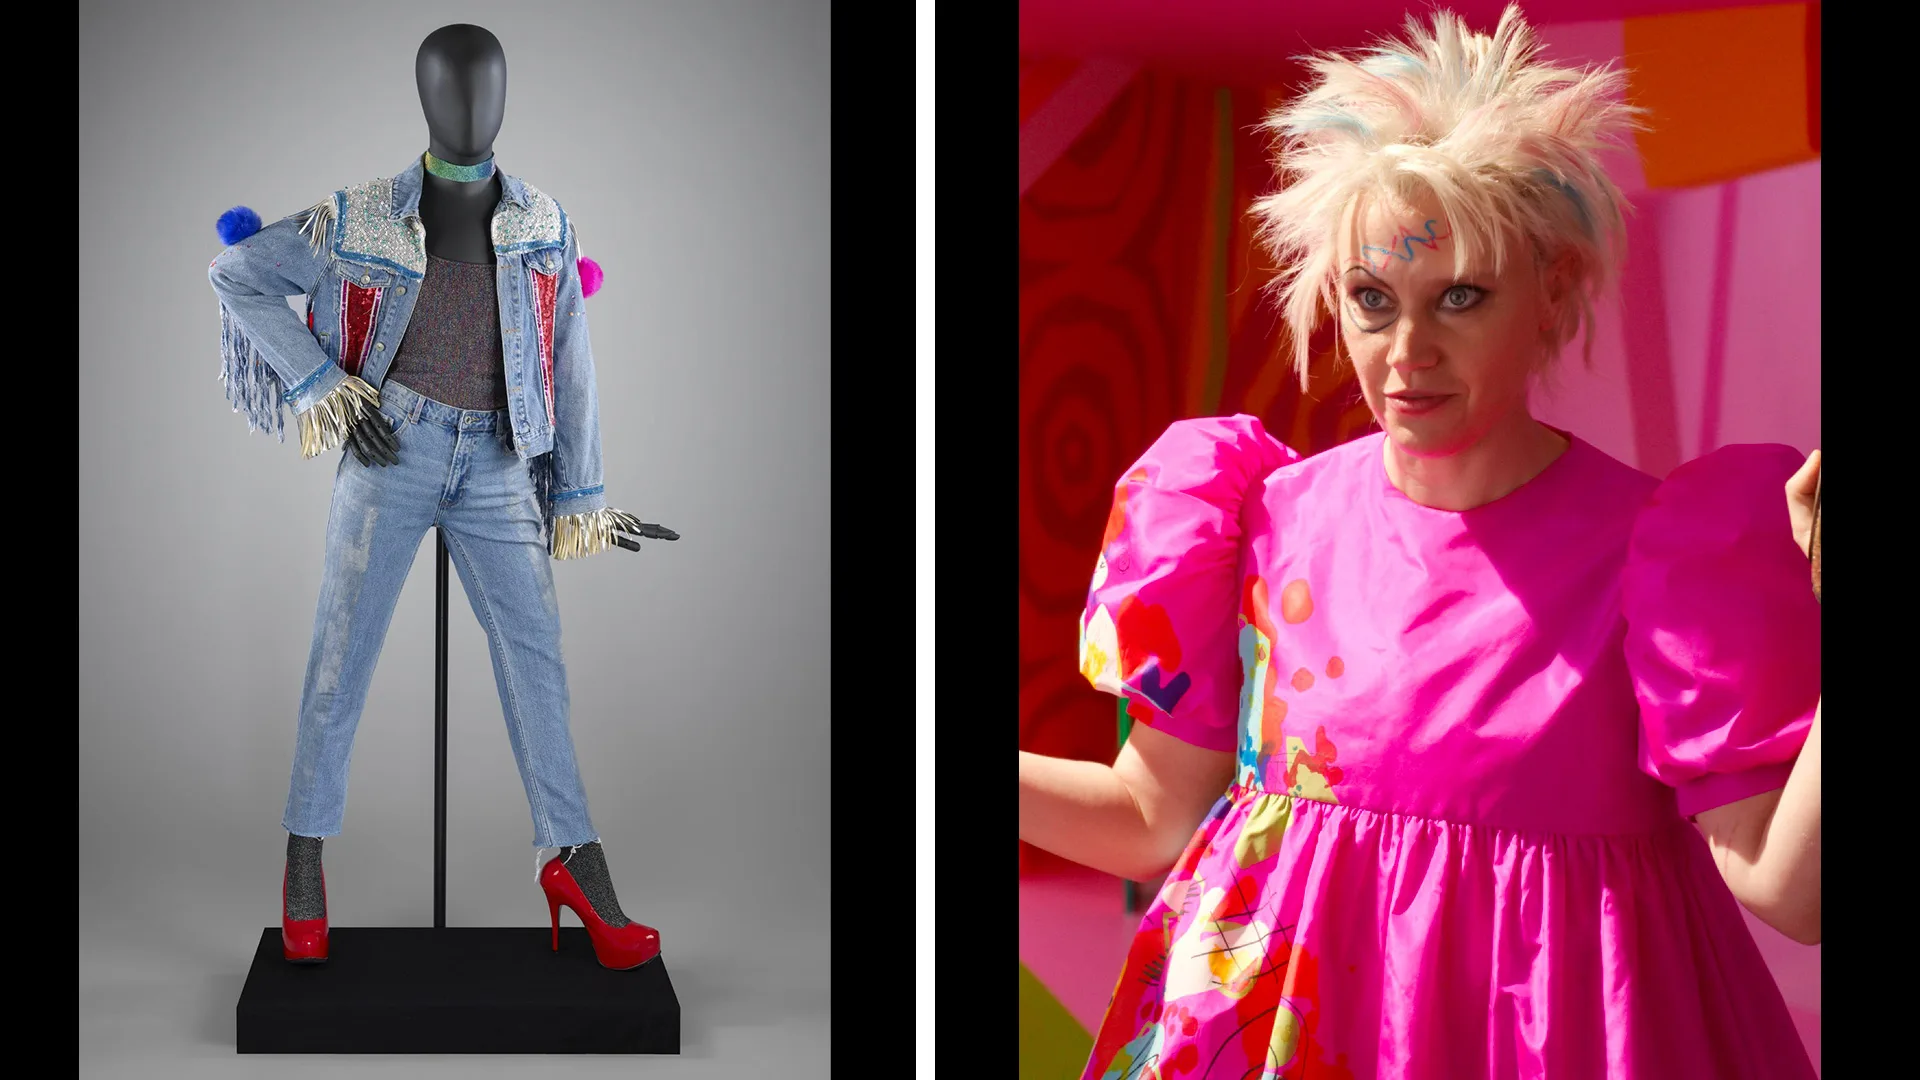 Photograph of the costume from Everybody's talking about jamie which is a jean jacket suit spliced next to a photograph of Weird Barbie from the movie Barbie looking at it